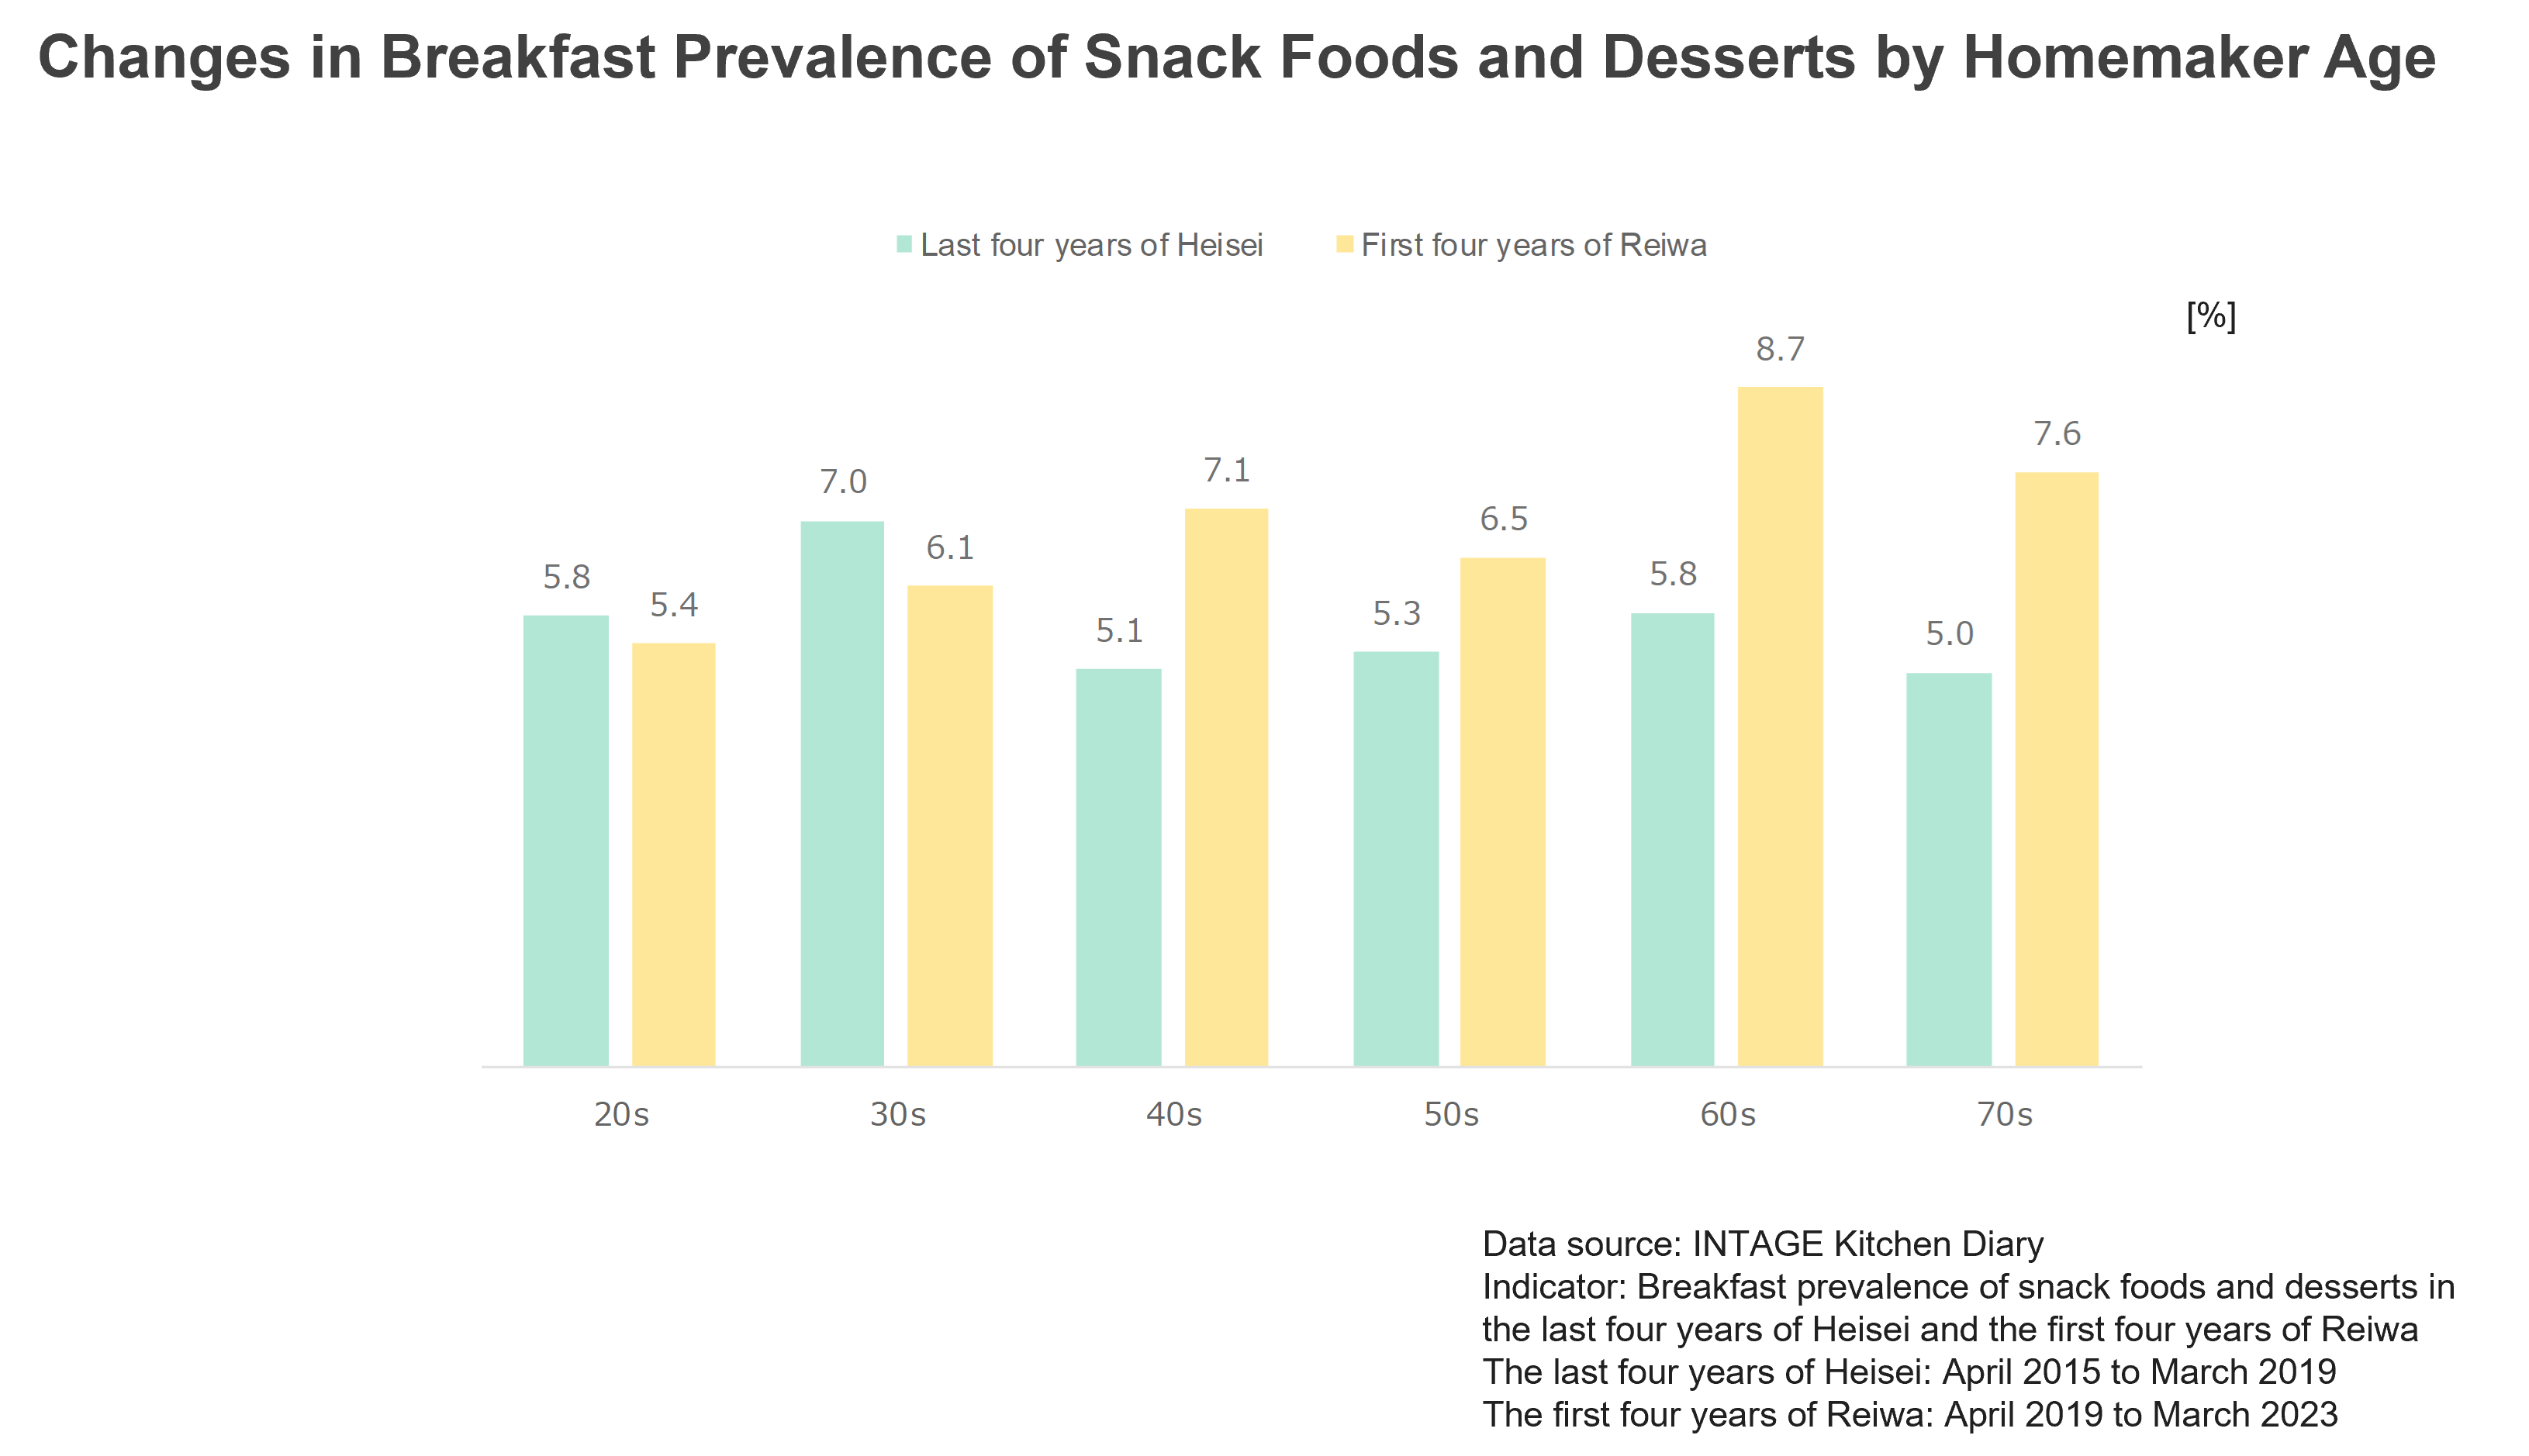 Changes in Breakfast Prevalence of Snack Foods and Desserts by Homemaker Age